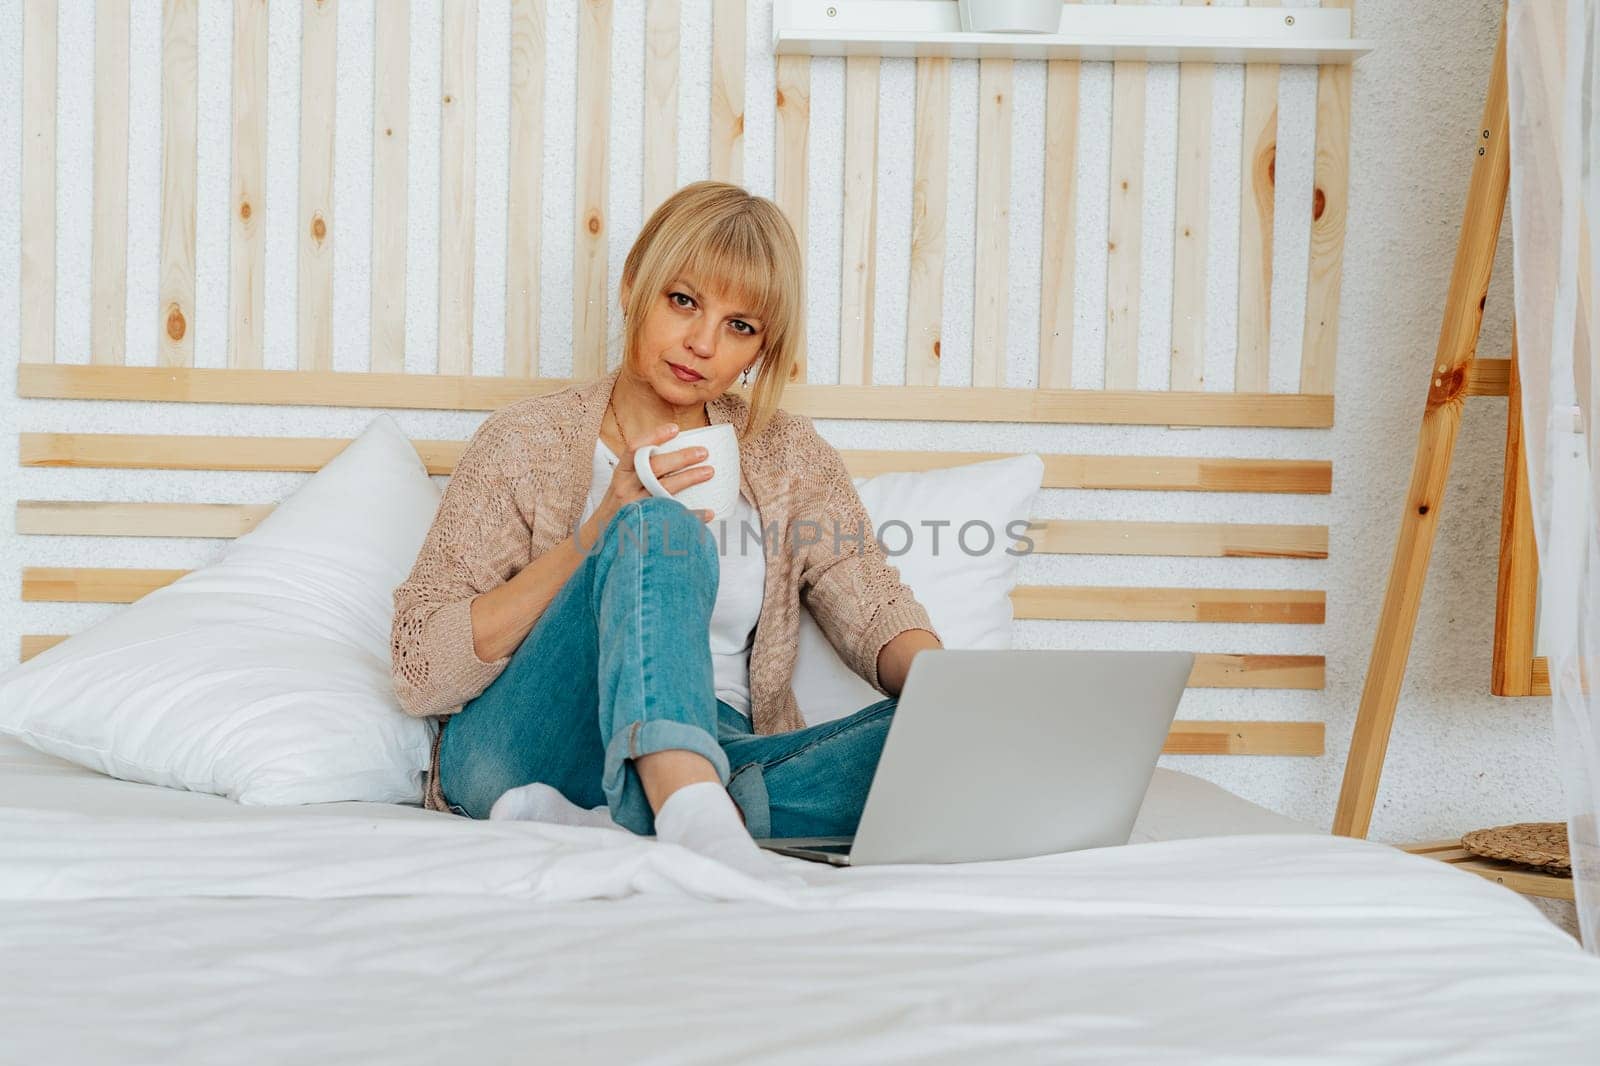 Distance learning online education and work. Relax mature woman typing at laptop, sitting on the bed and drinking coffee. Smiling senior with notebook at home office. Using computer and shopping.